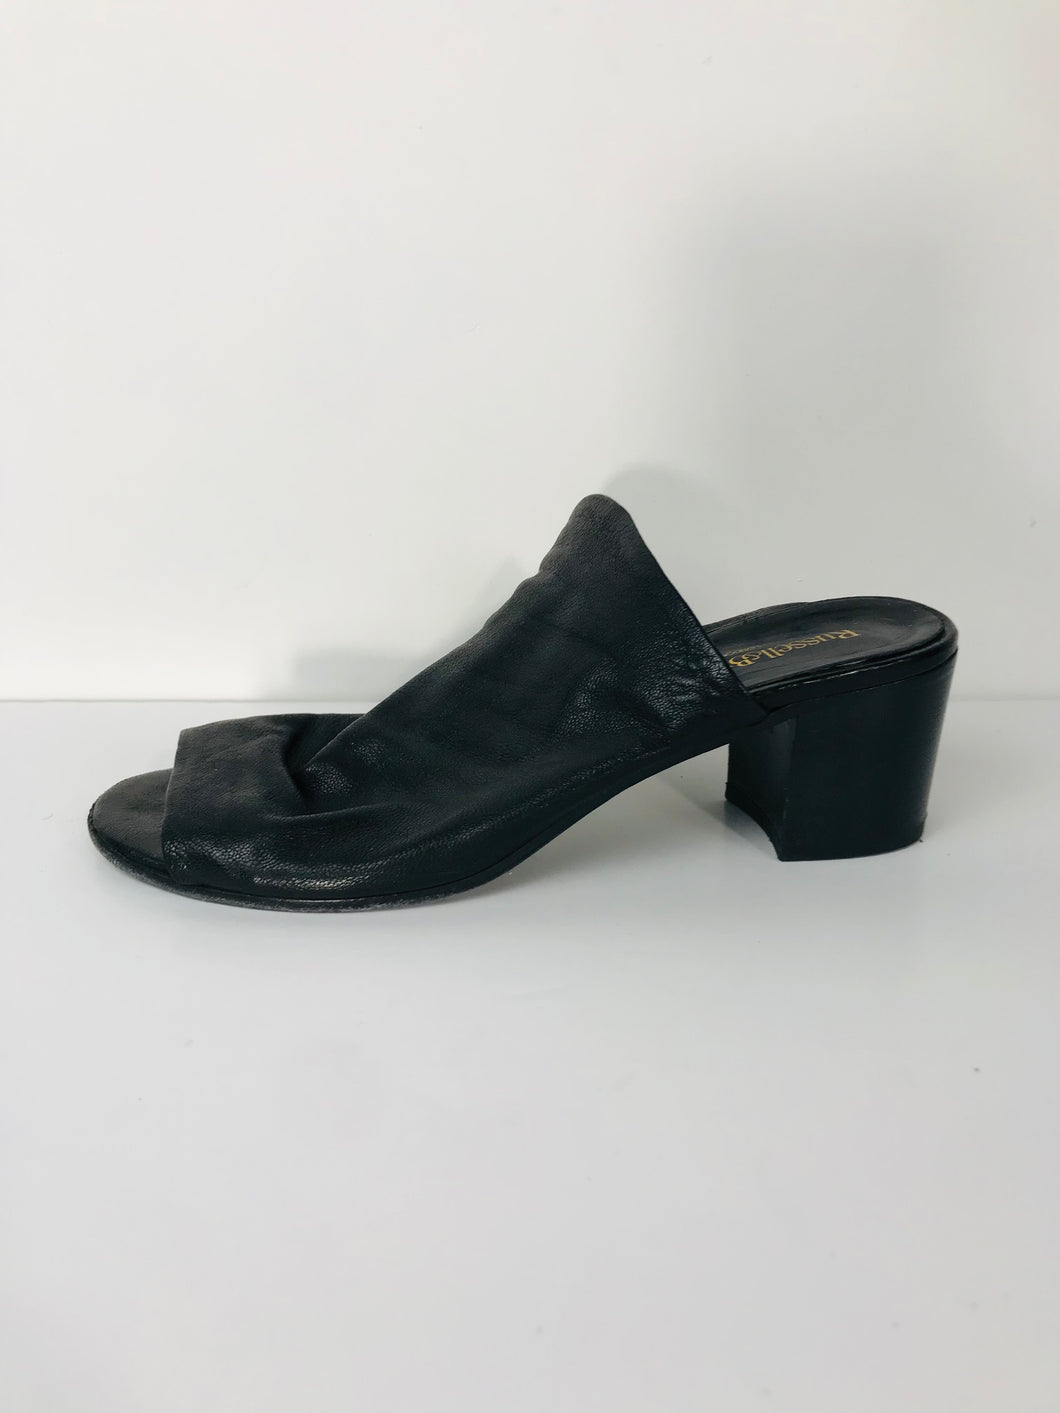 Russell & Bromley Women's Leather Mules Heels | EU40 UK7 | Black